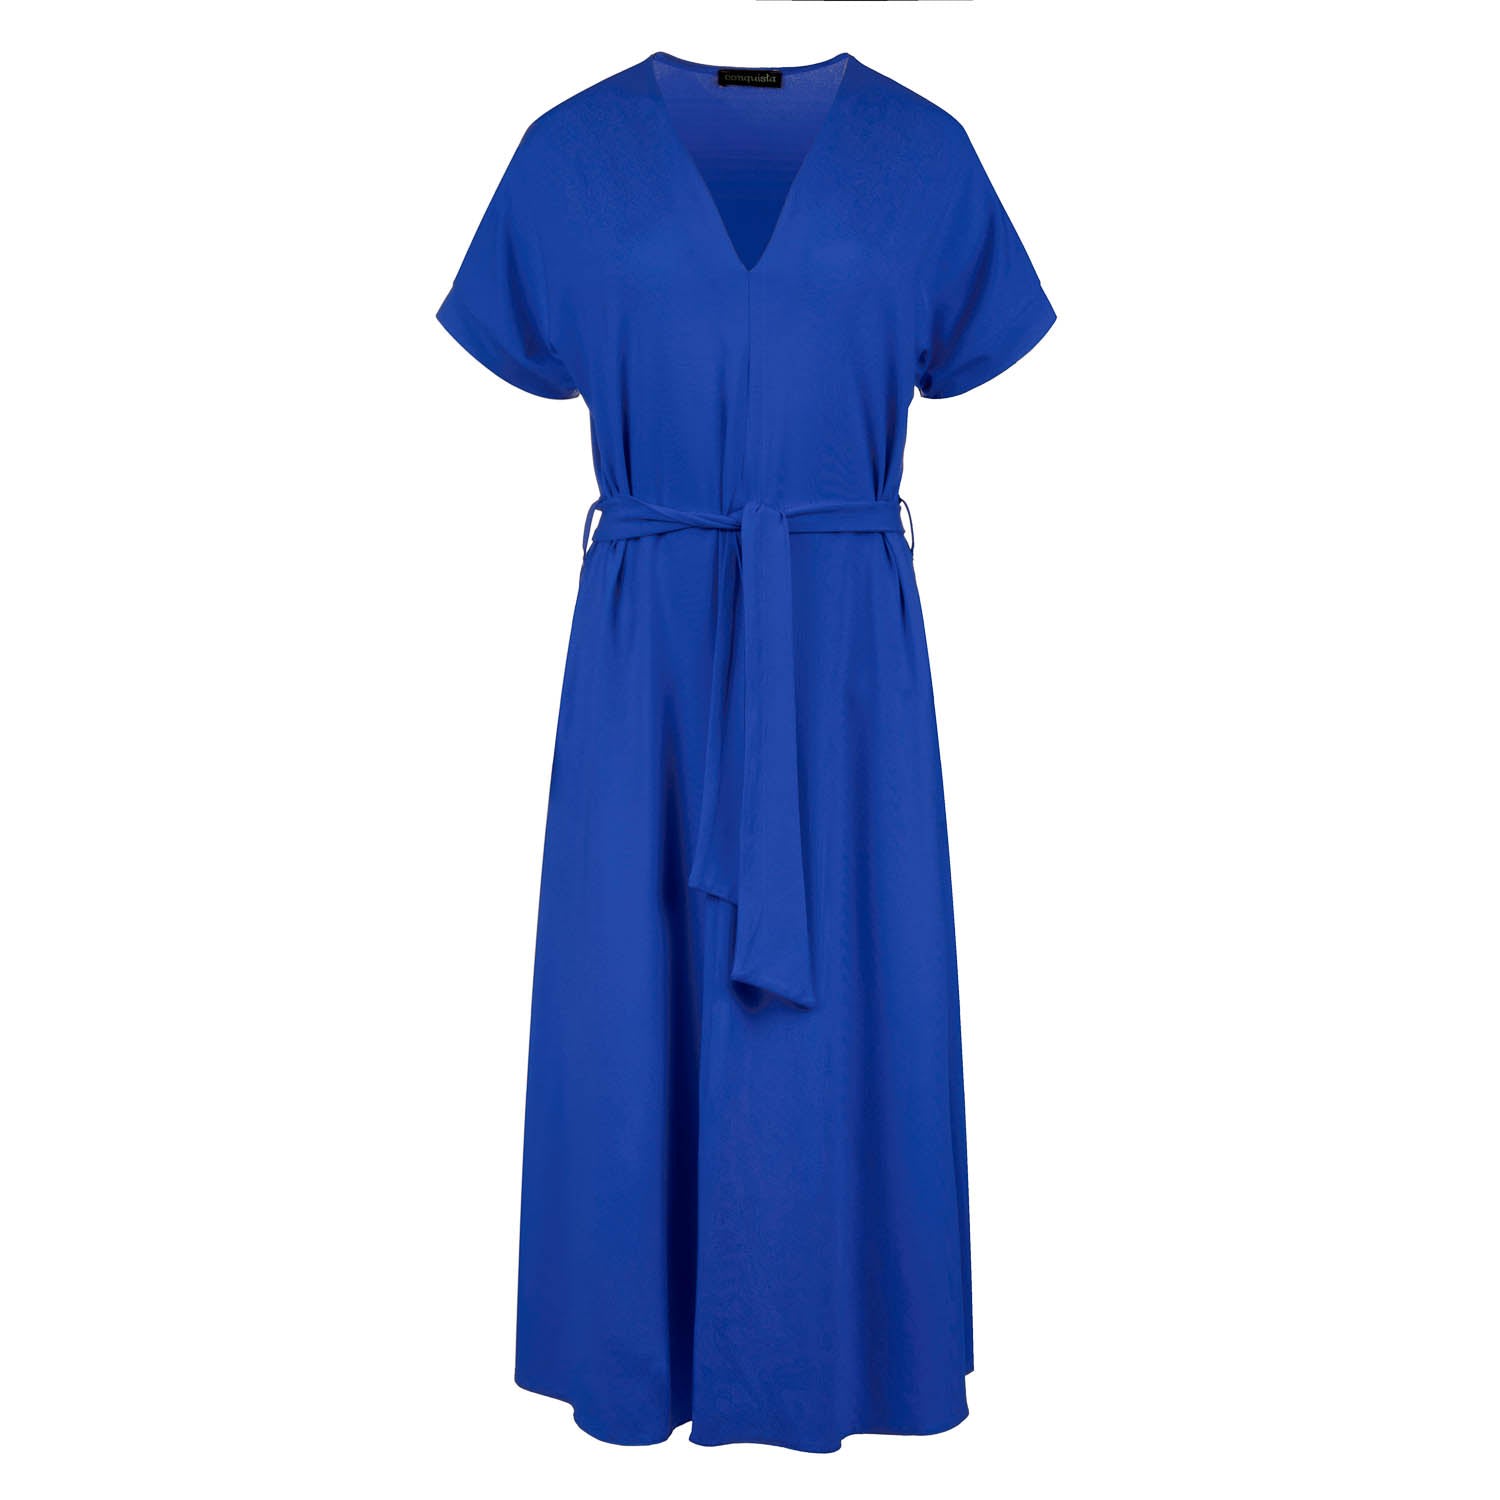 Women’s Royal Blue Belted Midi Dress Extra Large Conquista